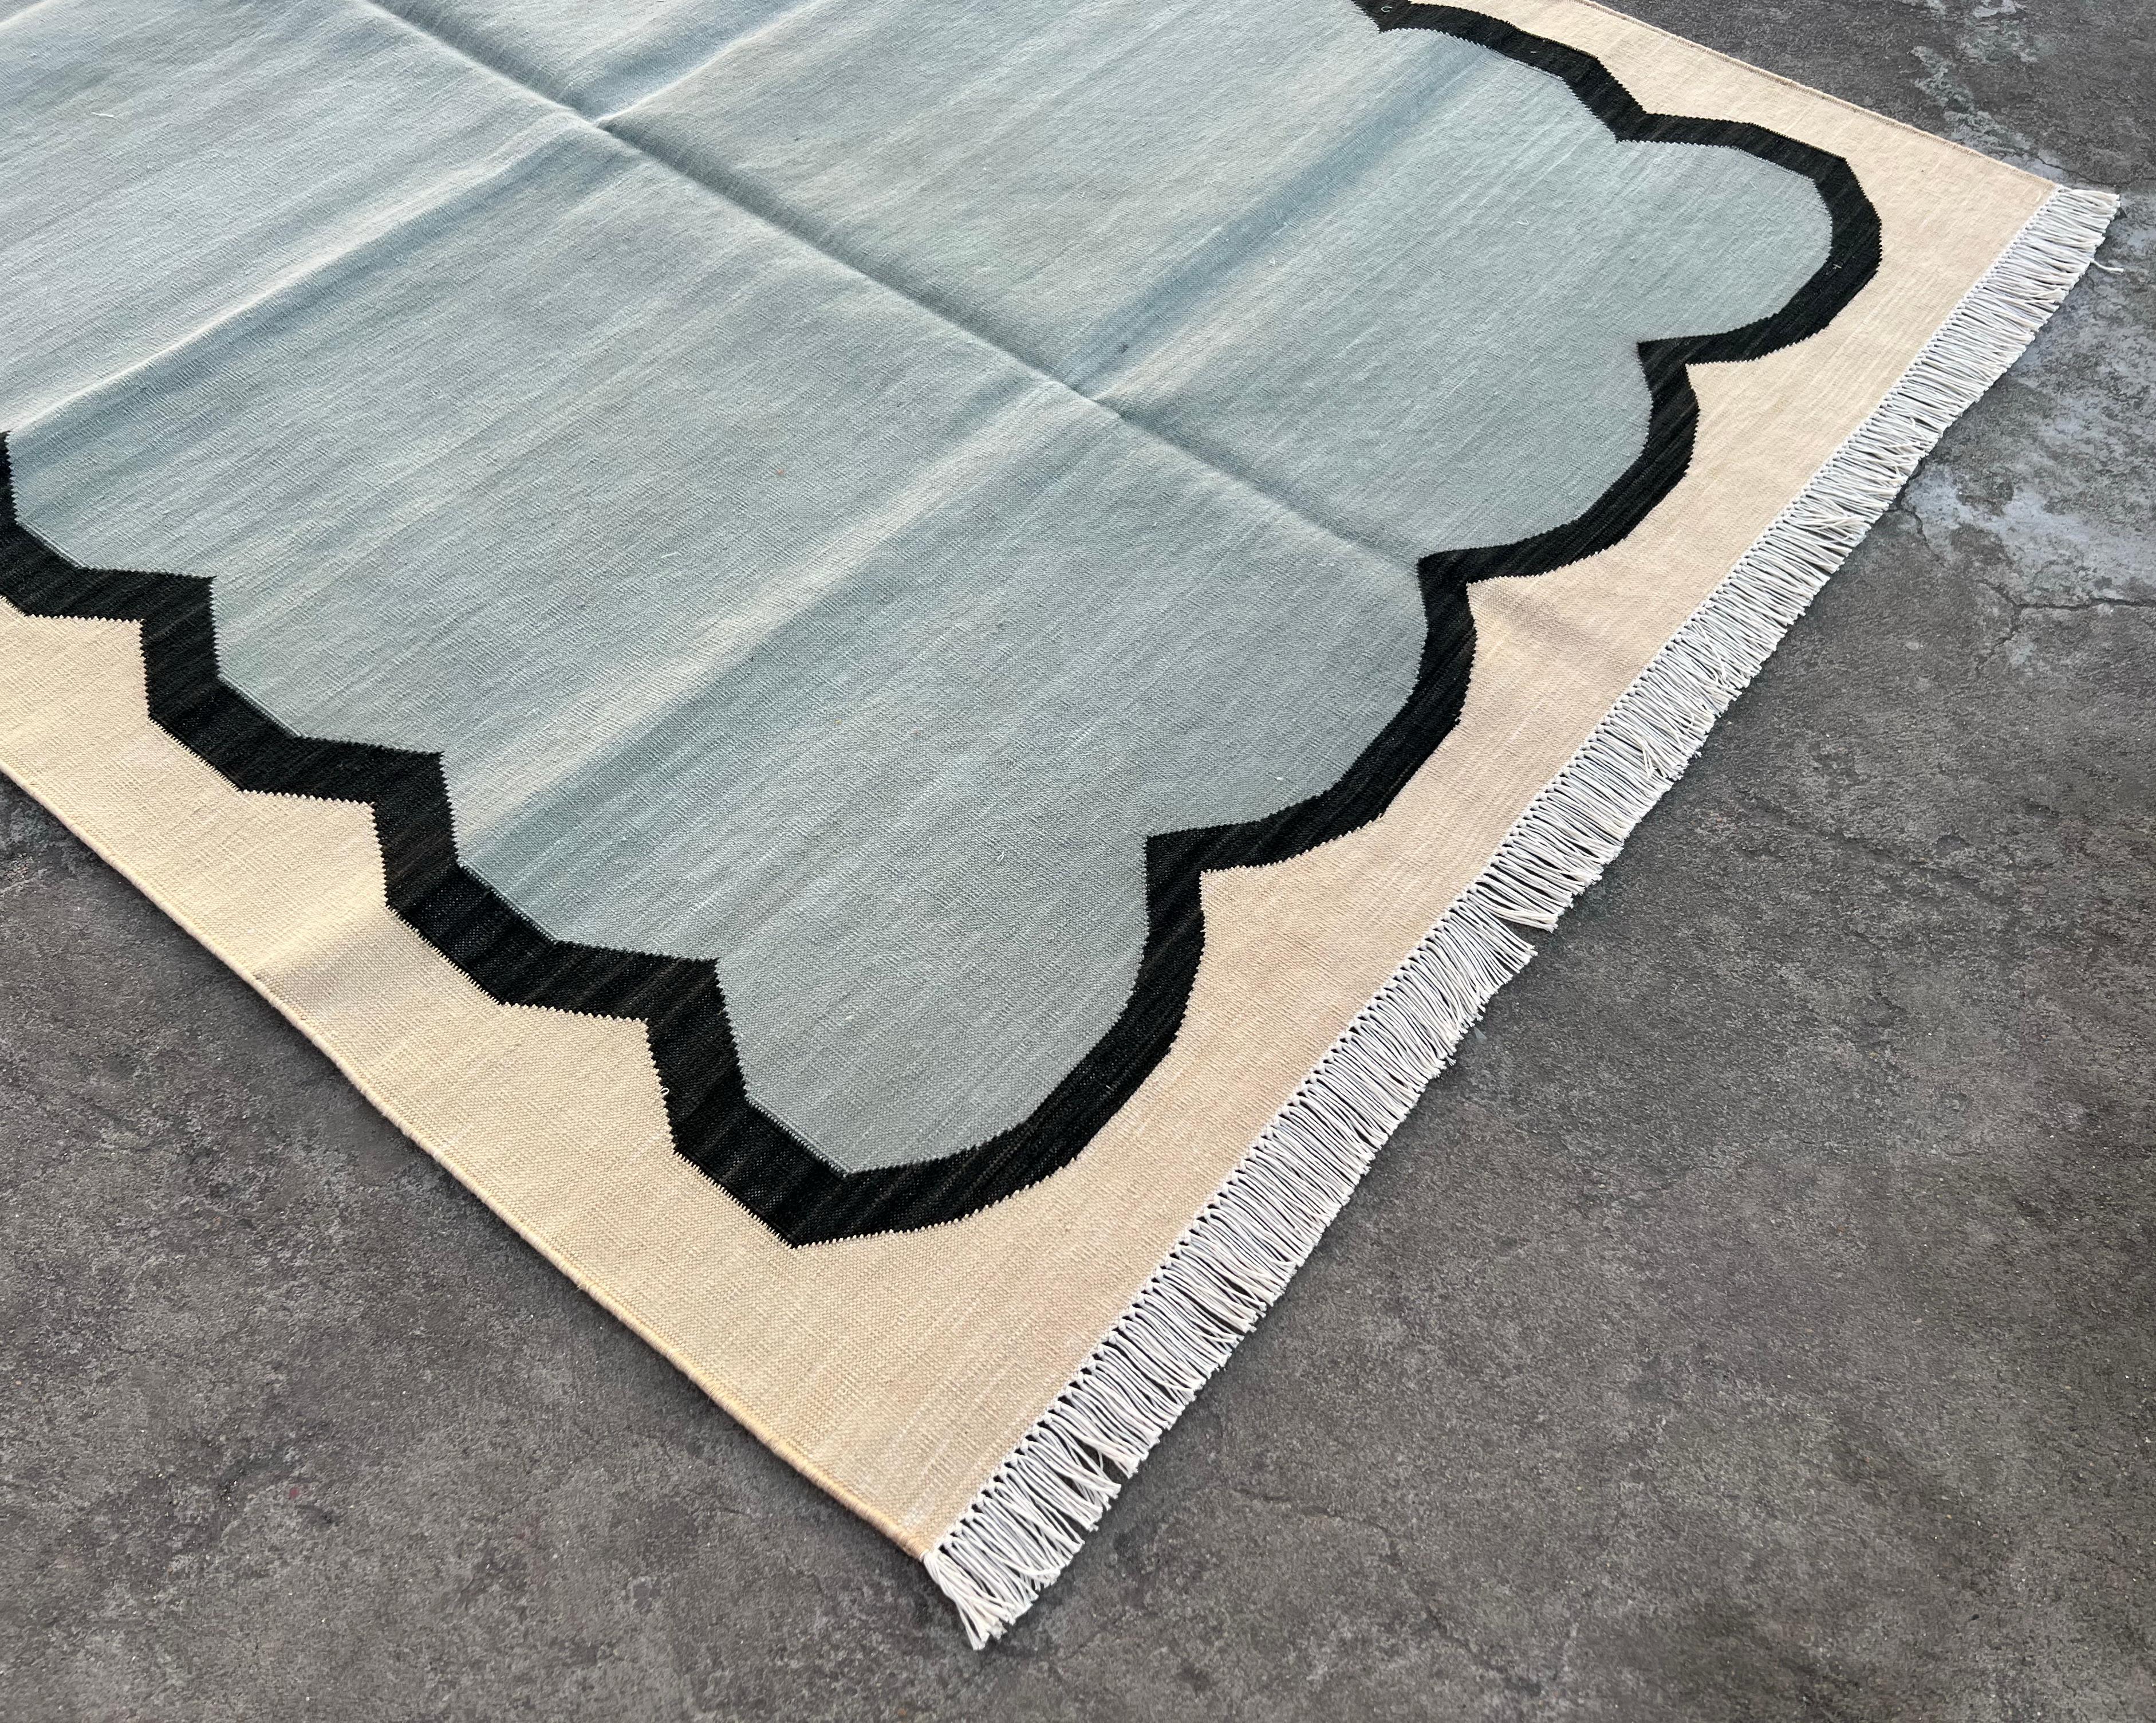 Hand-Woven Handmade Cotton Area Flat Weave Rug, 4x6 Blue And Cream Scallop Striped Dhurrie For Sale